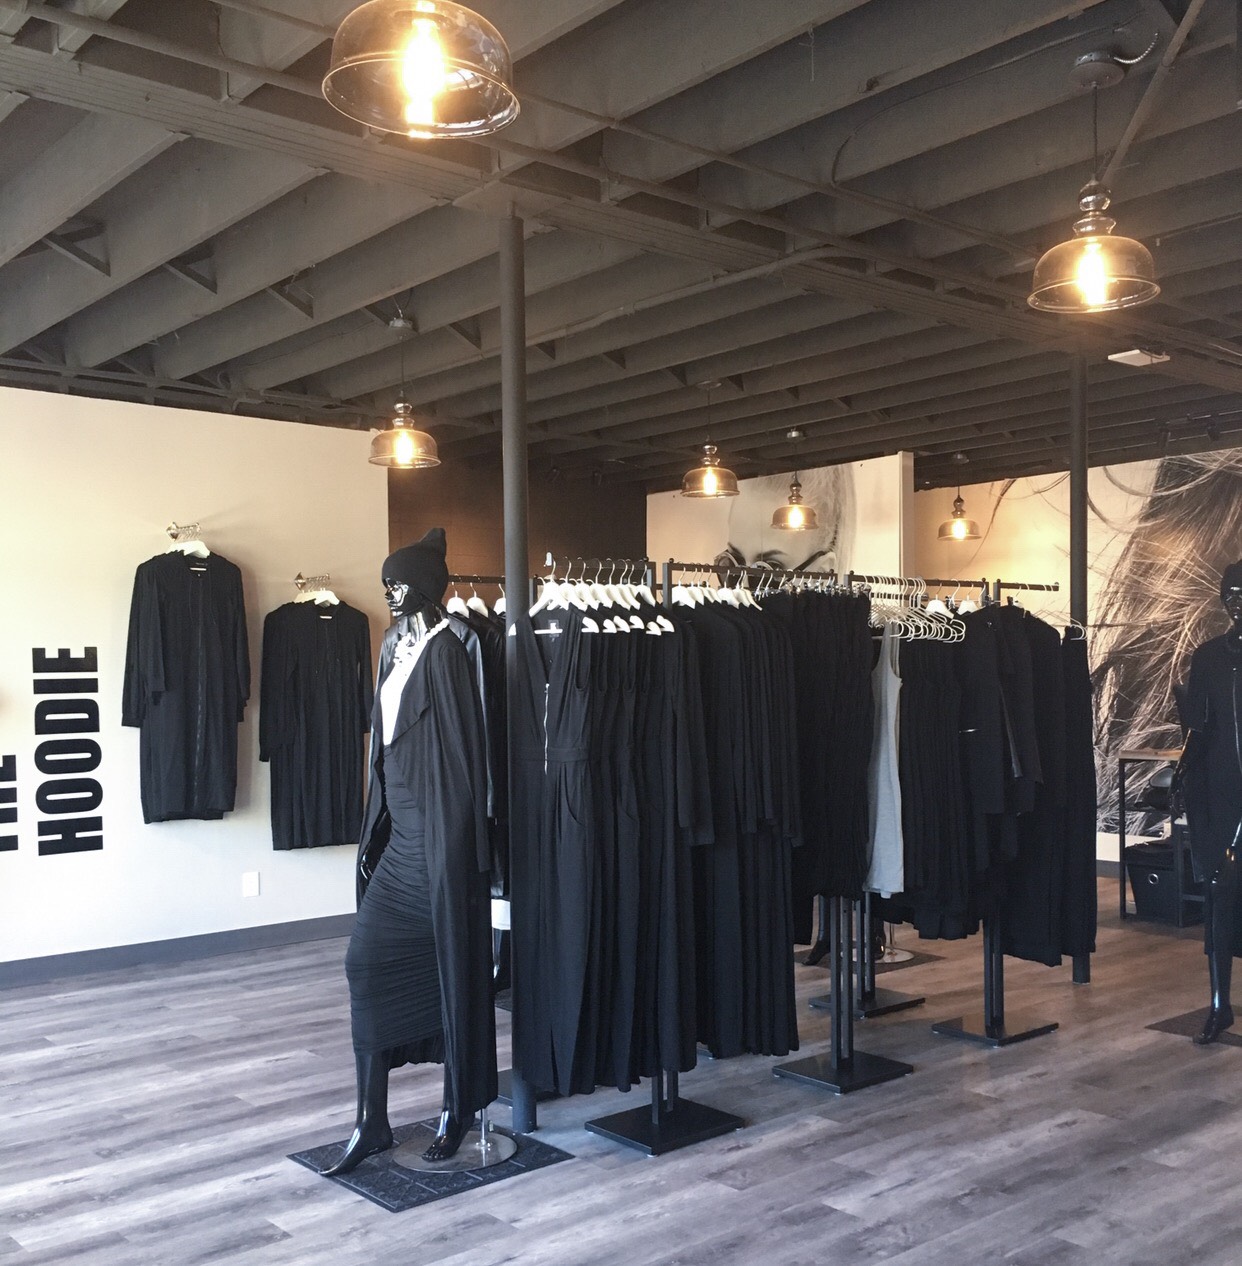 GROUND-FLOOR RETAIL SPACE HOUSING ‘EMMYDEVEAUX’ FASHION COLLECTION.